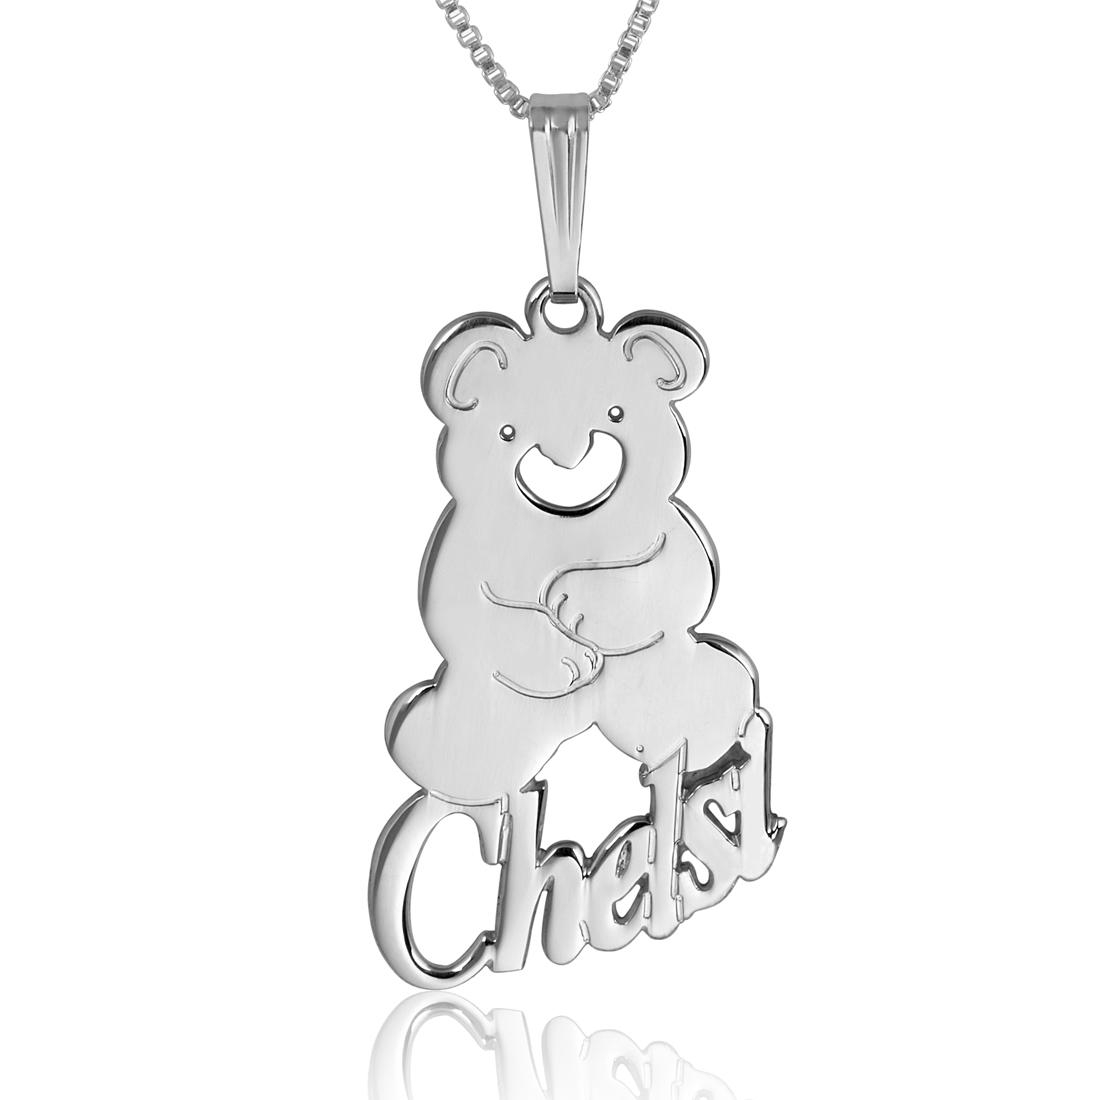 Teddy Snuggles Name Necklace in Sterling Silver - 1